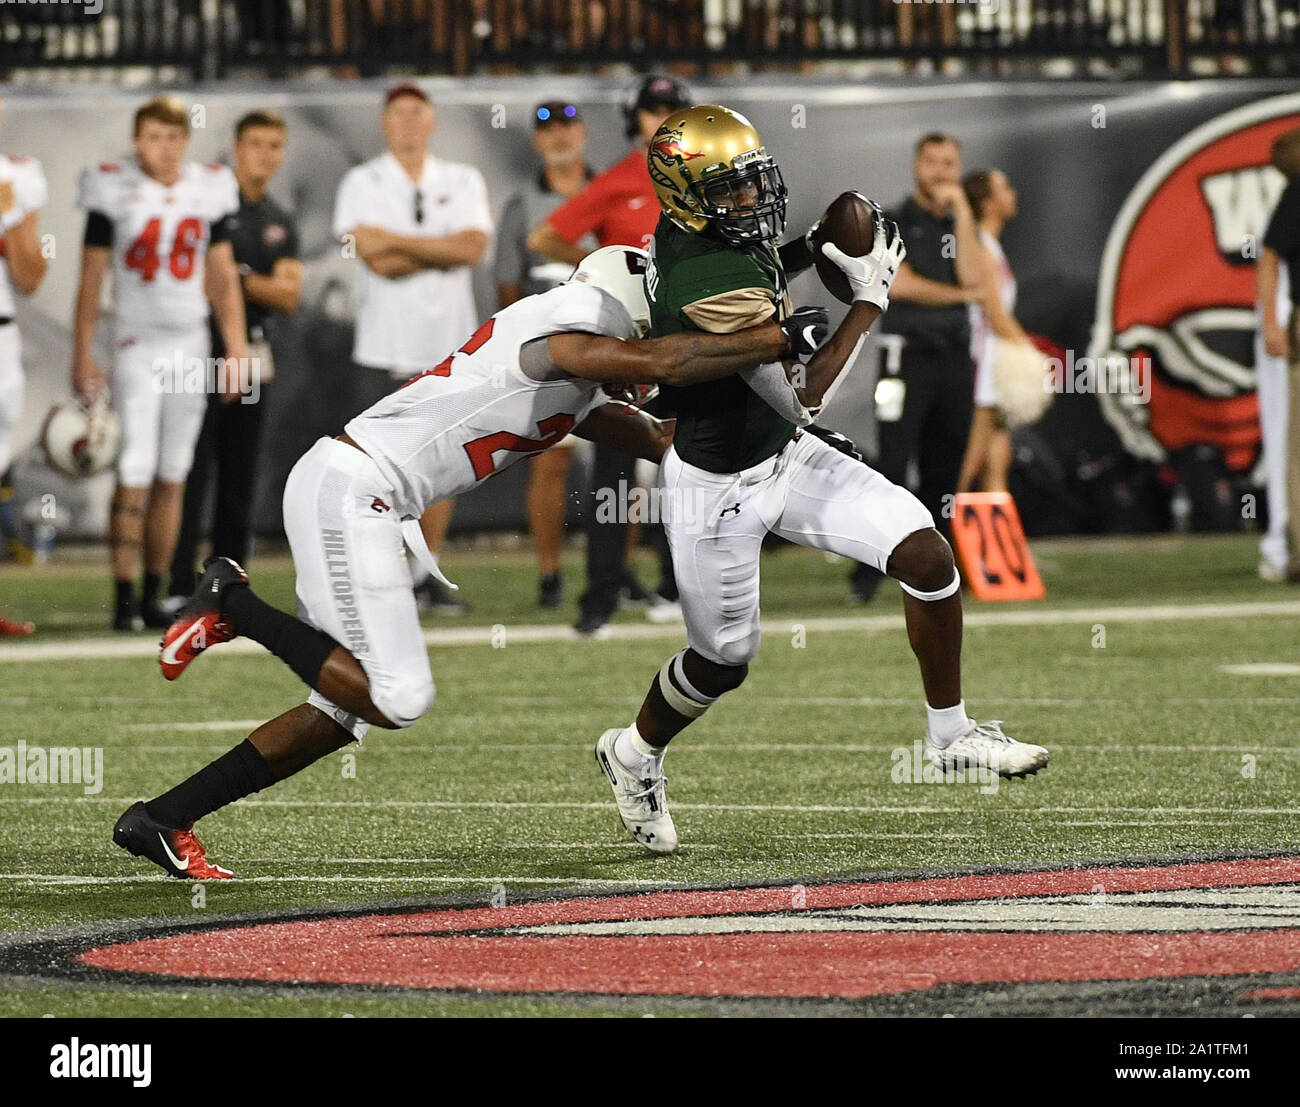 September 28, 2019: Western Kentucky Hilltoppers defensive back Cardavion Myers (22) tackes UAB Blazers wide receiver Austin Watkins (6) during a NCAA football game between the UAB Blazers and the WKU Hilltoppers at Houchens Industries-LT Smith Stadium (Photo Credit: Steve Roberts.CSM) Stock Photo